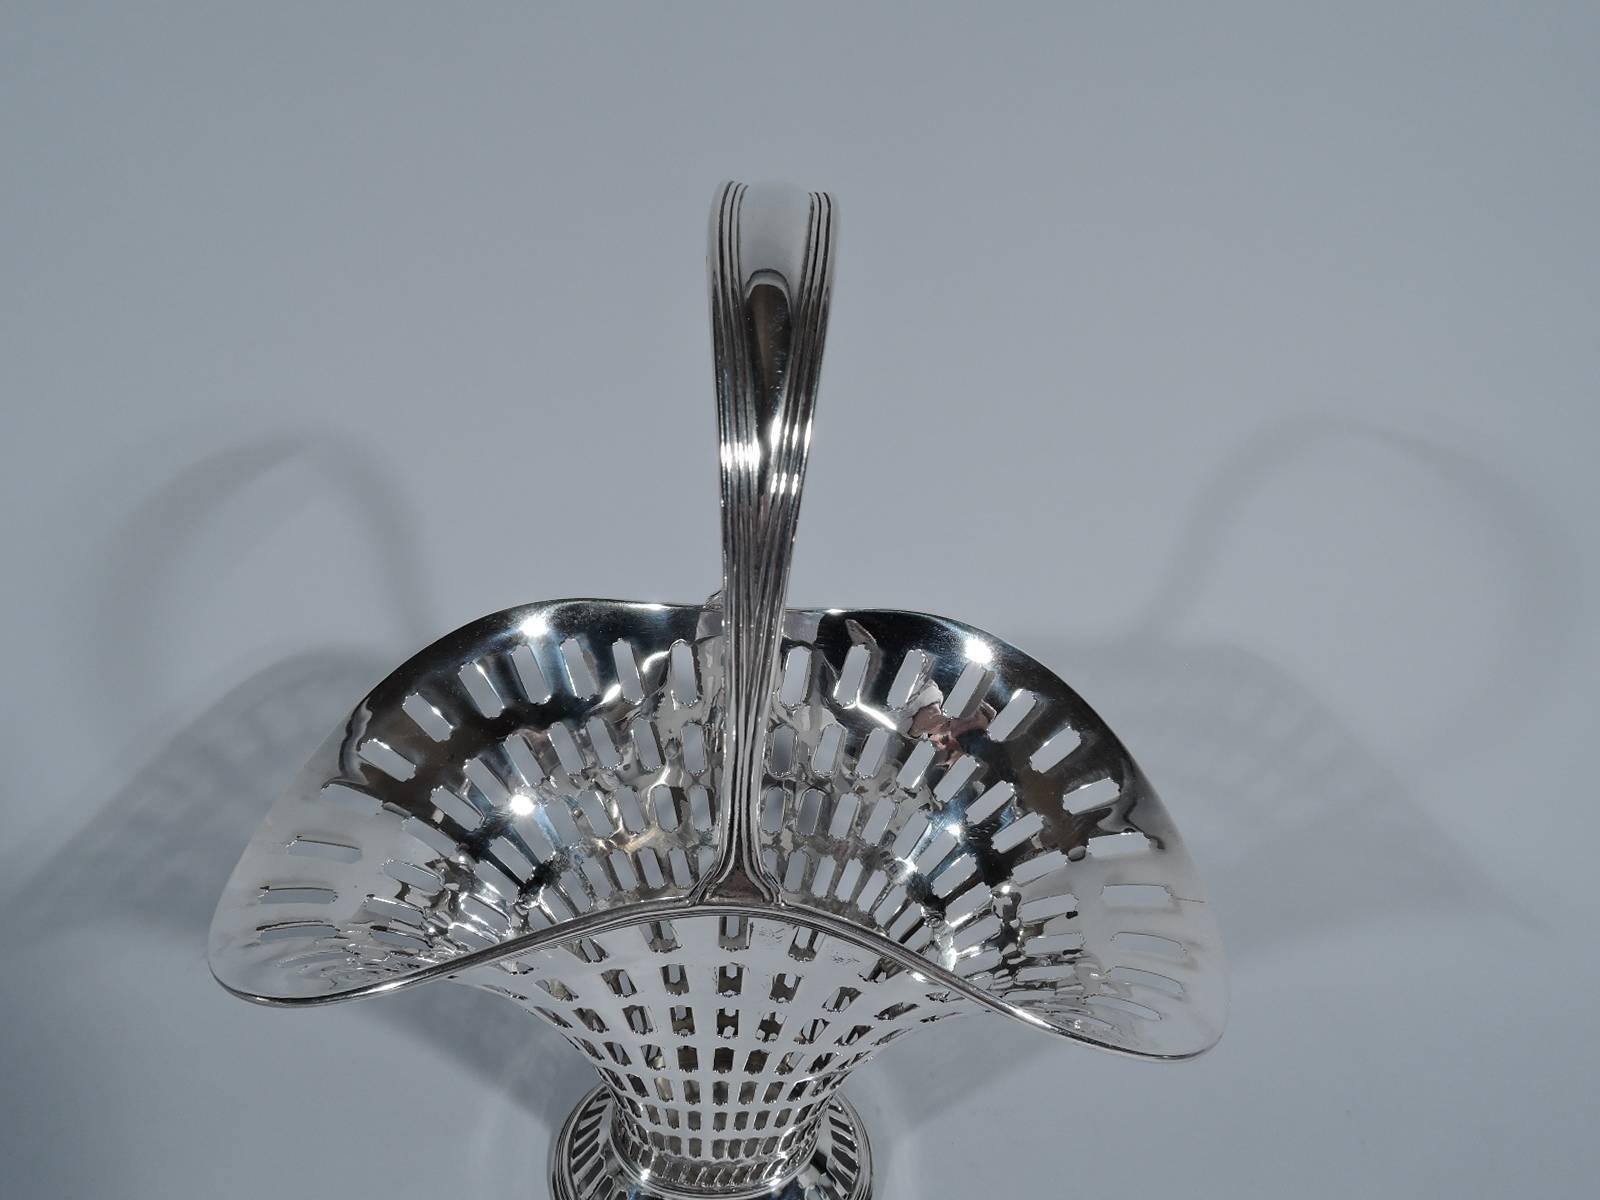 Edwardian sterling silver basket. Made by Tiffany & Co. in New York, circa 1903. Tapering “flattened” ovoid body with flared mouth and spread foot. Reeded and tapering stationary handle. Graduated tubular piercing. Hallmark includes pattern no.